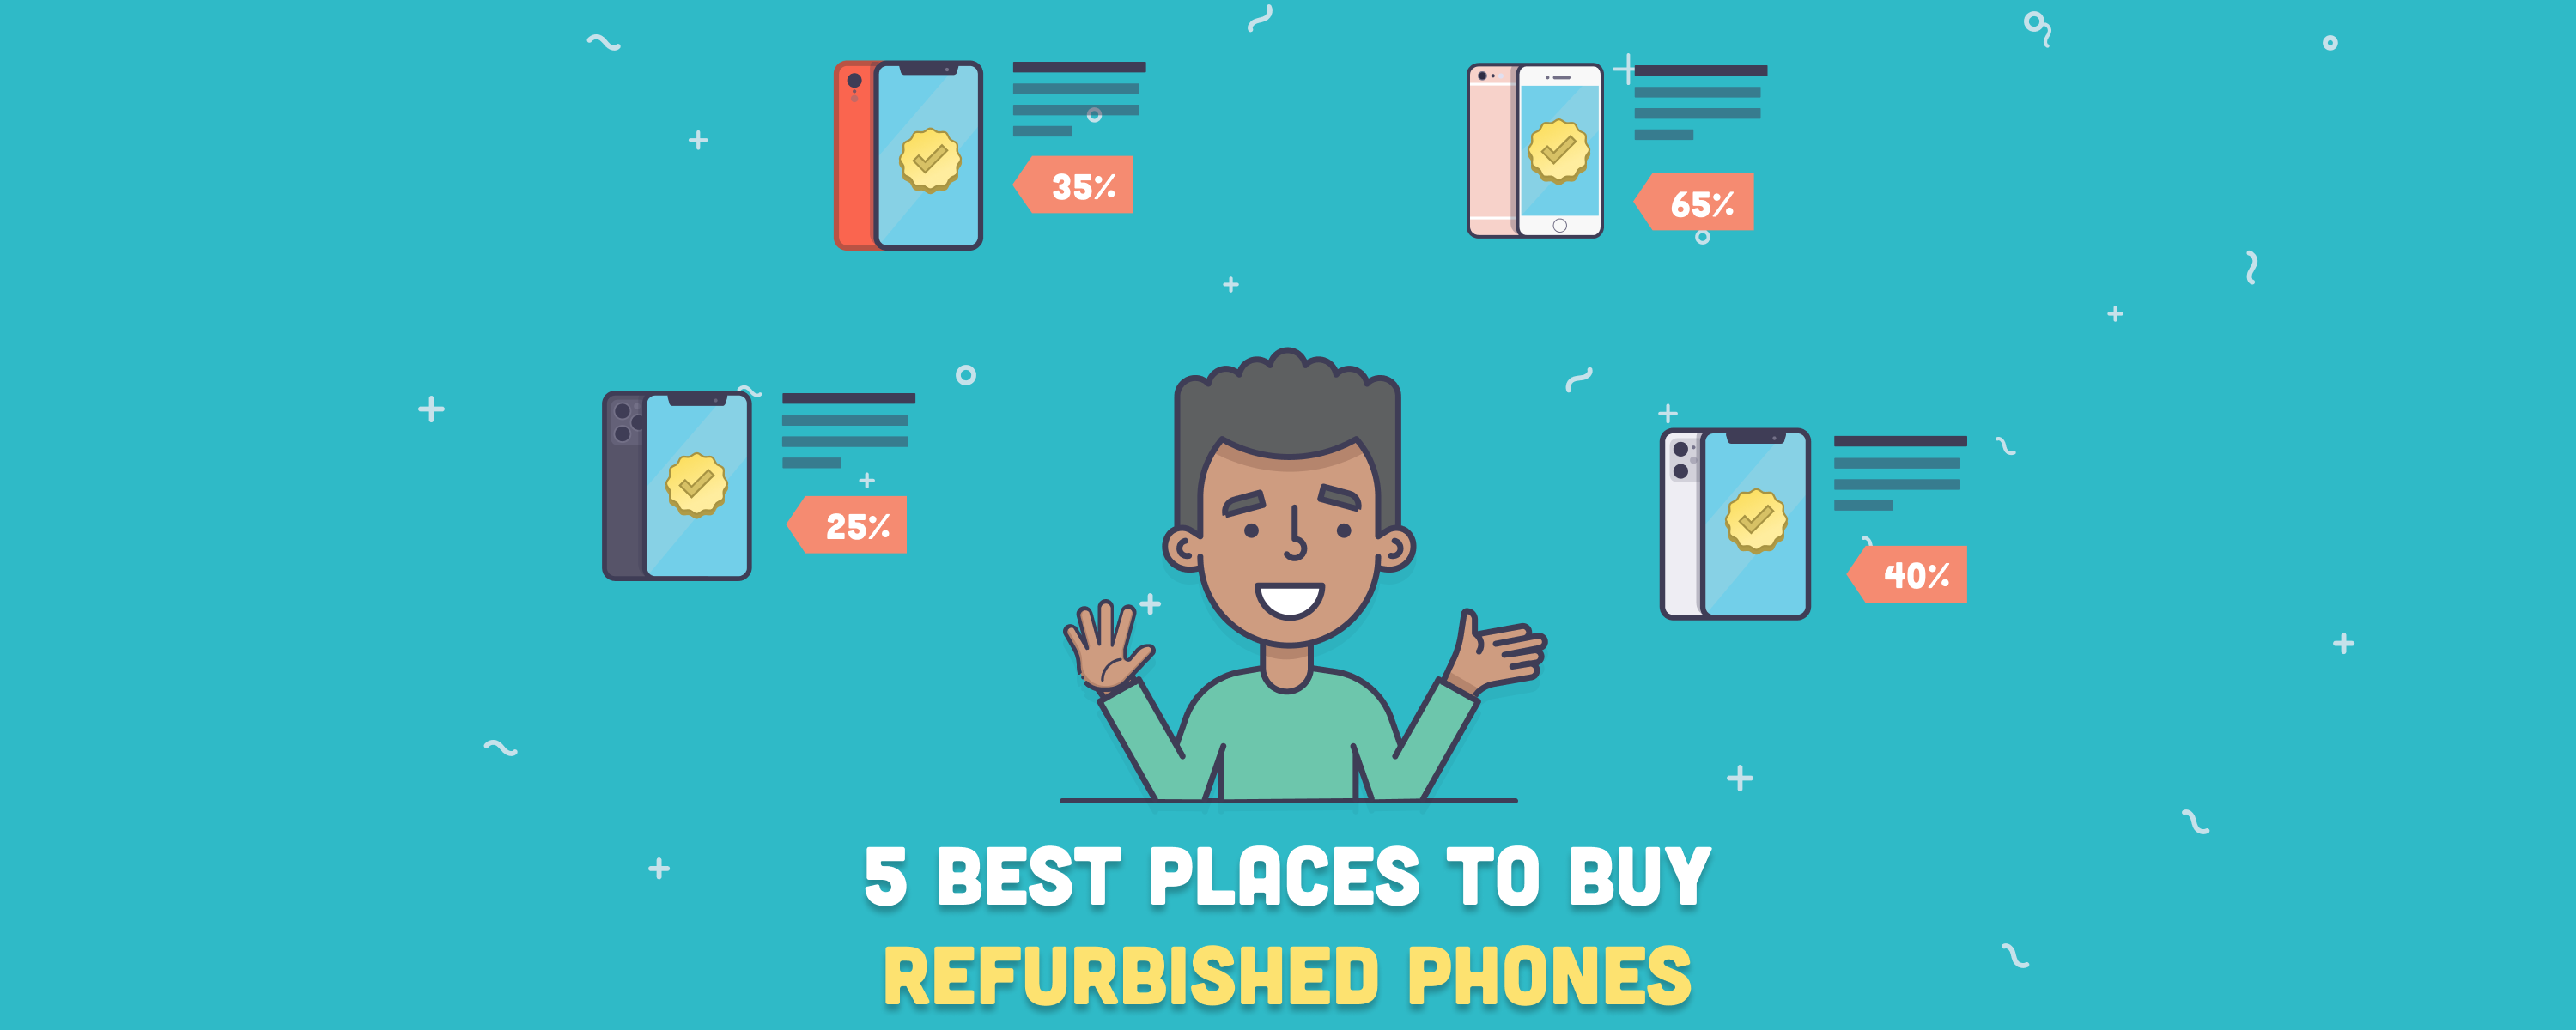 5 Places Where You Can Buy Refurbished Phones